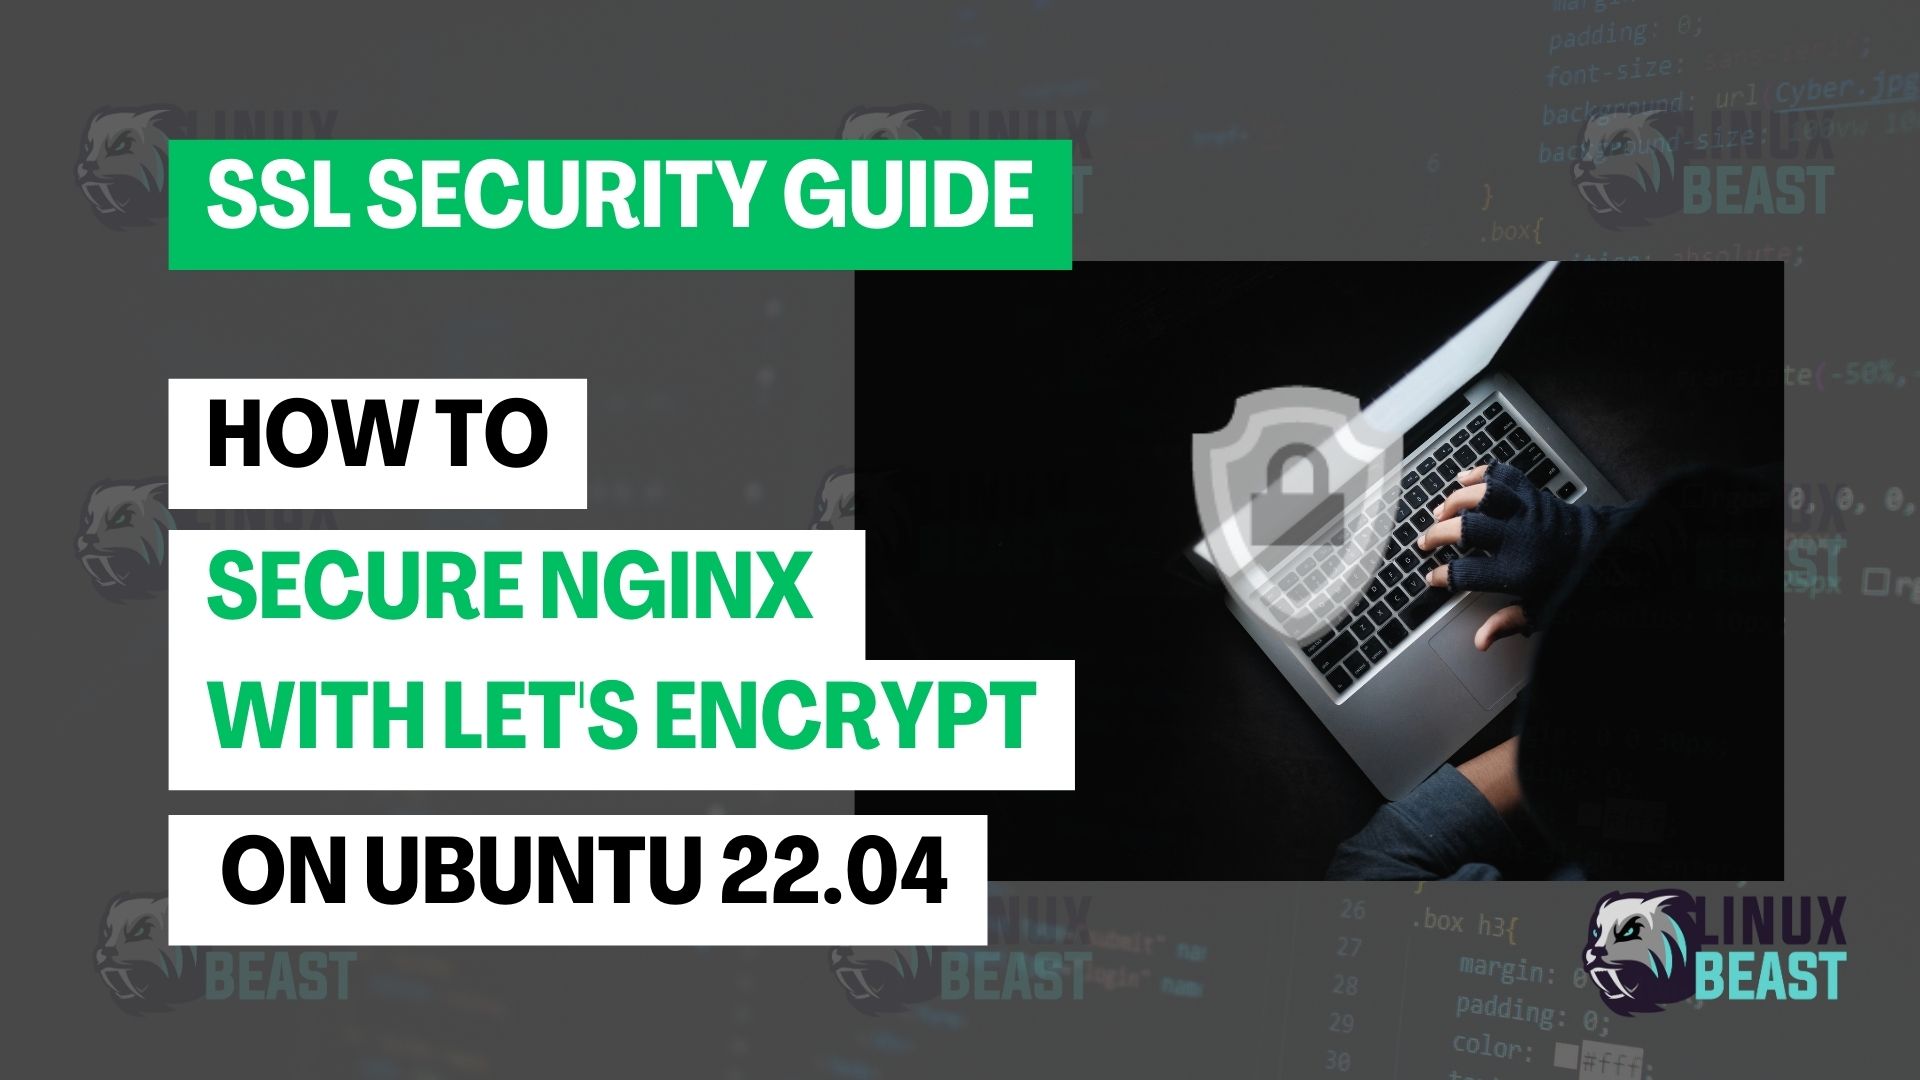 How to Secure Nginx with Let's Encrypt on Ubuntu 22.04